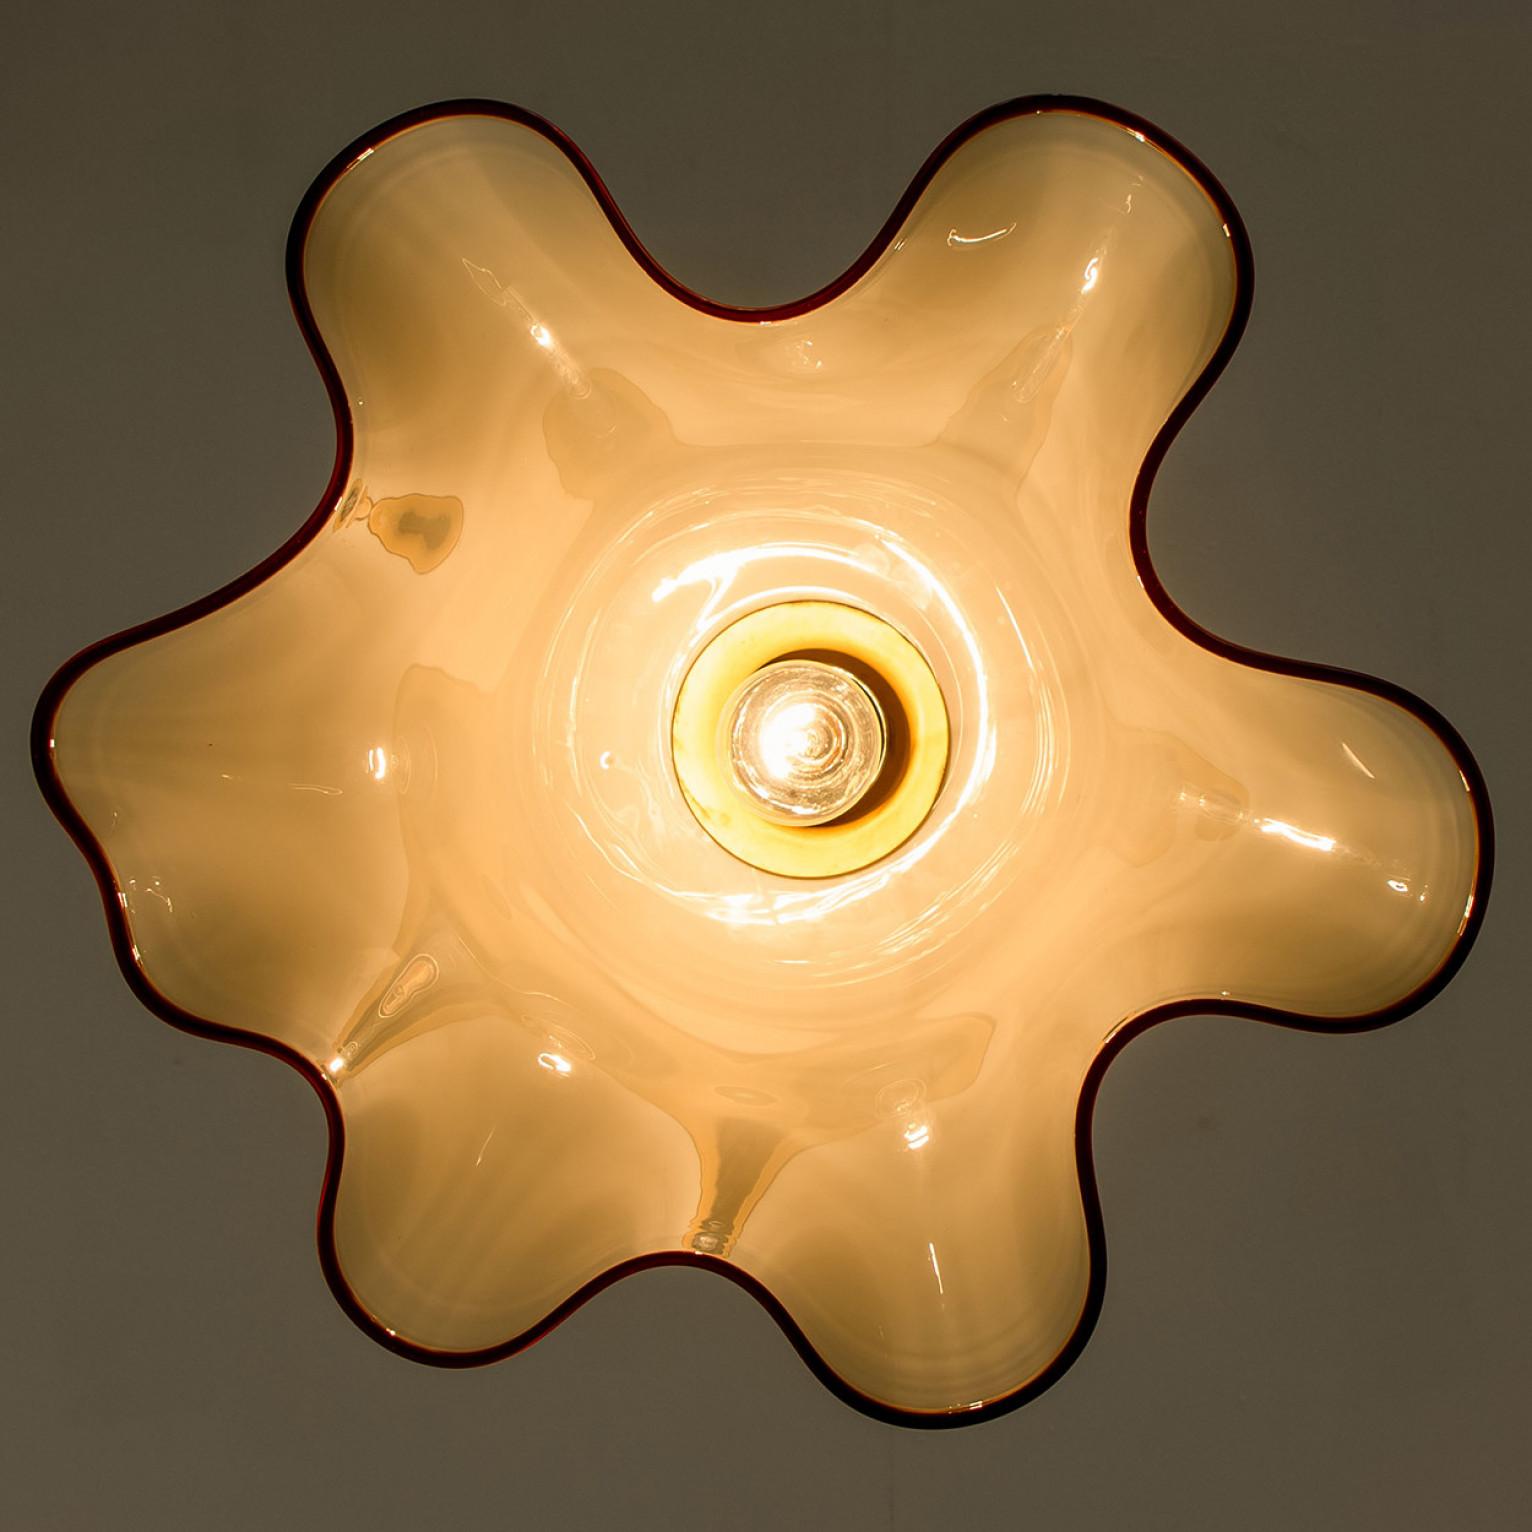 Mid century brass chandelier in the shape of a flower by J.T. Kalmar, Austria around 1970.
Illuminates beautifully.

Designed and executed by Kalmar Vienna in the 1970s. The white/yellow opaque glass shows a red border. The lamps is in the style of